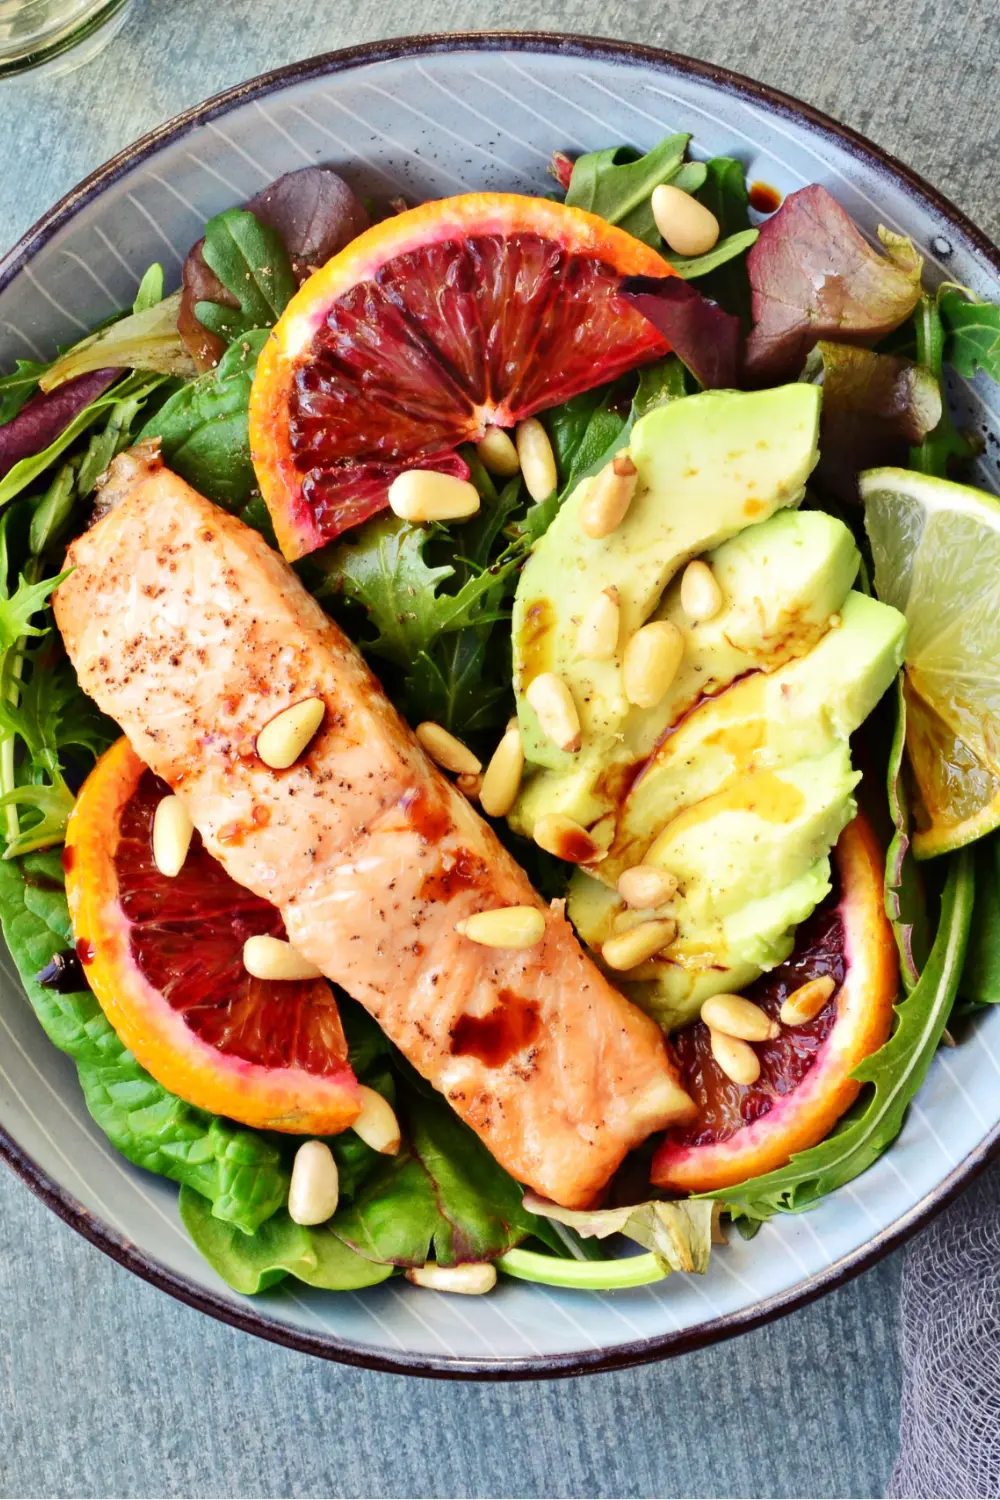 Salmon and Zucchini Salad With Almond Dressing